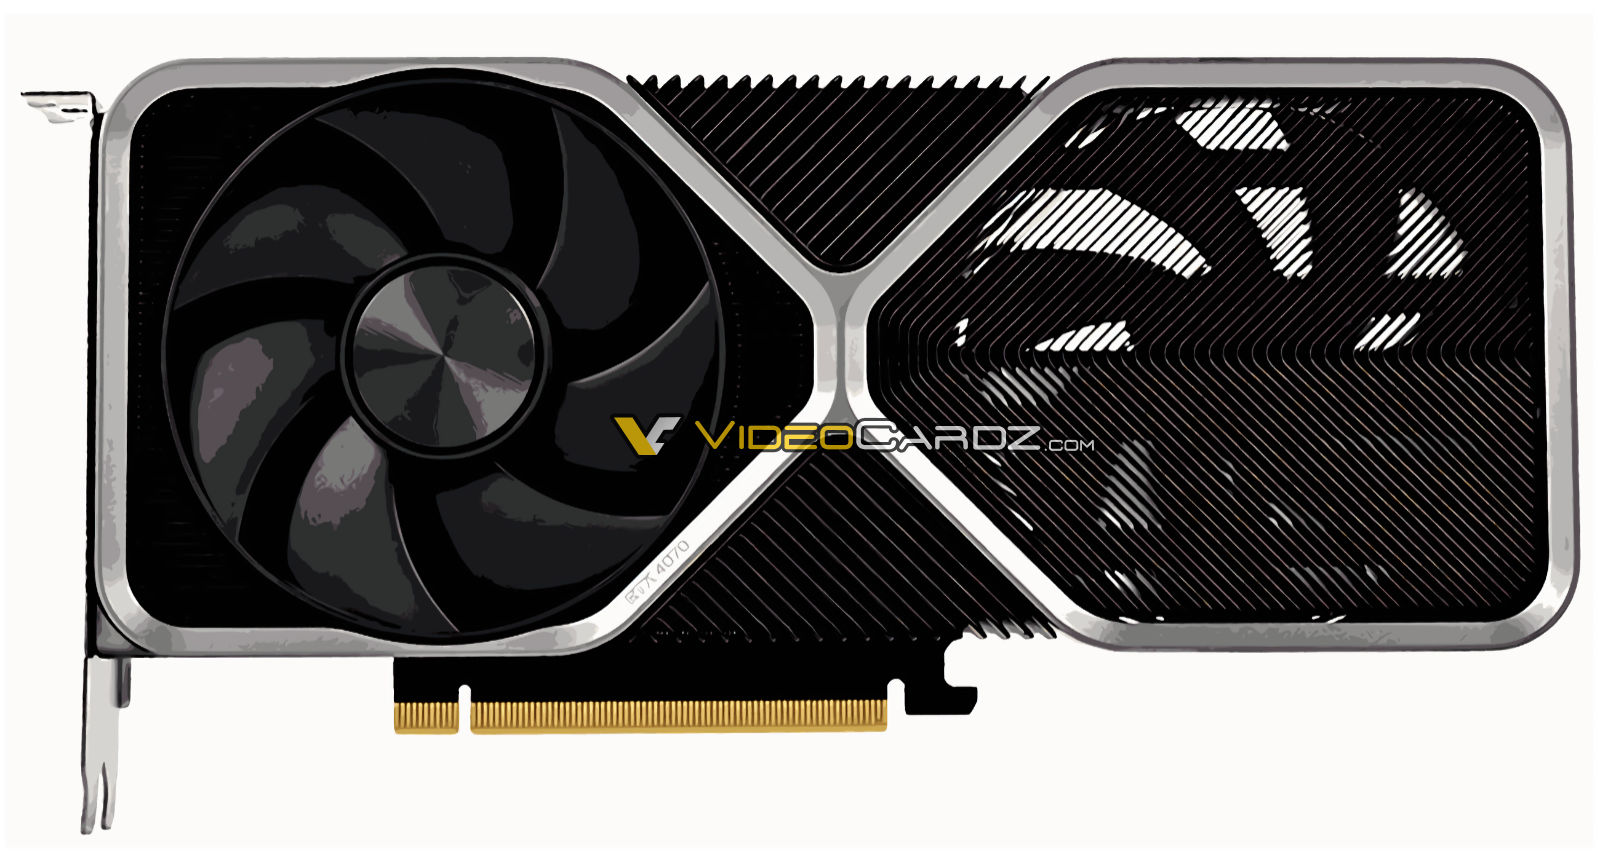 AMD Radeon RX 6800 Drops to $469 as RTX 4070 Arrives